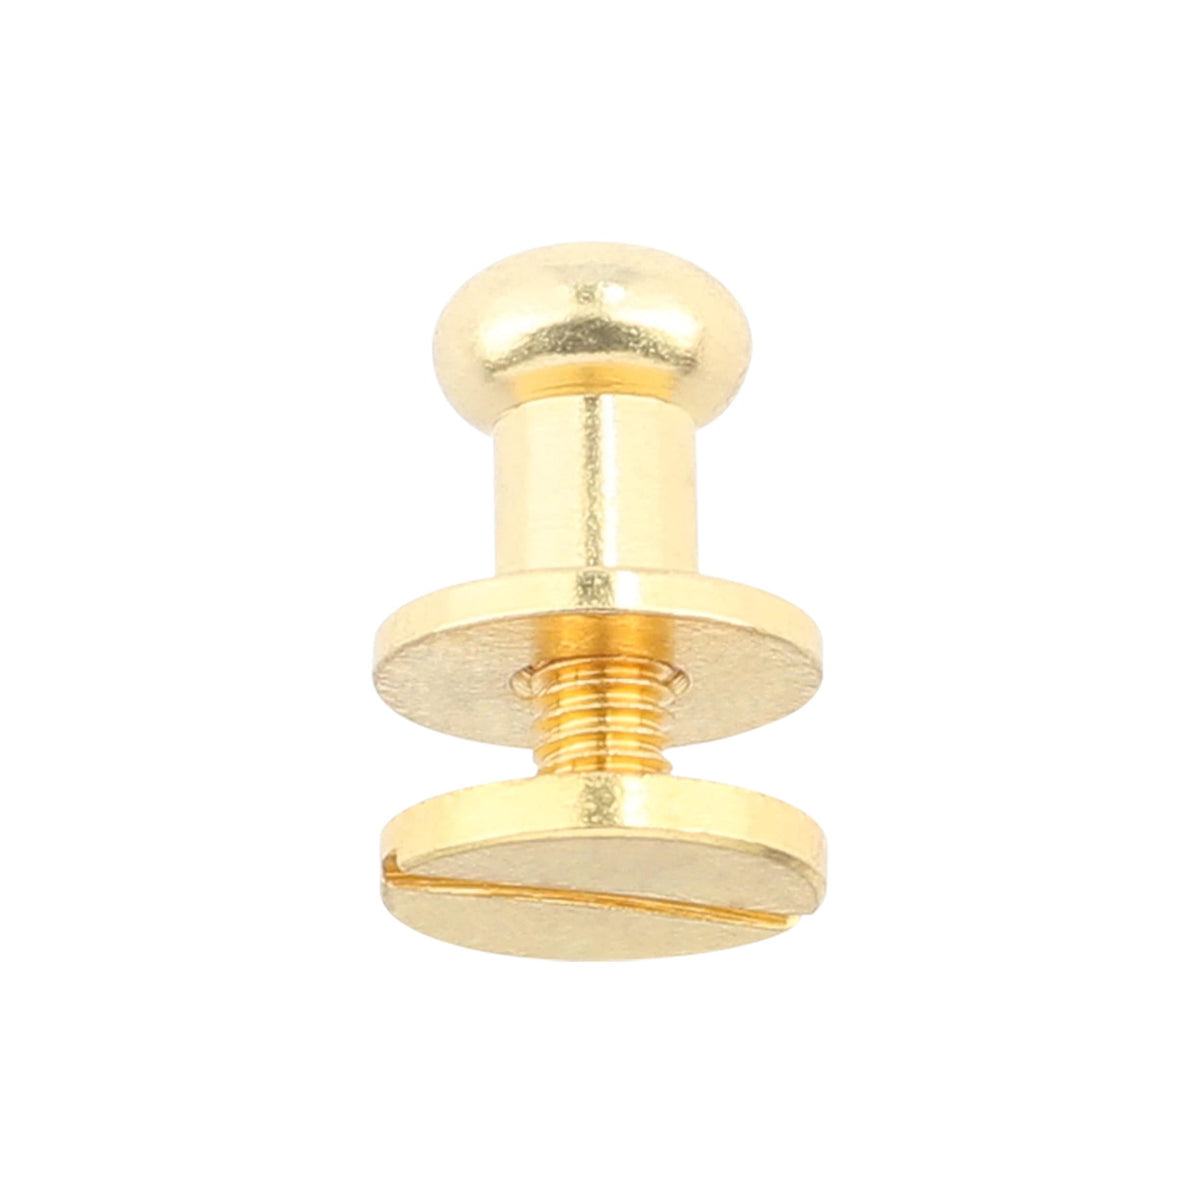 9mm, Gold, Round Top Collar Button Stud with Screw, Solid Brass, #P-21 –  Weaver Leather Supply